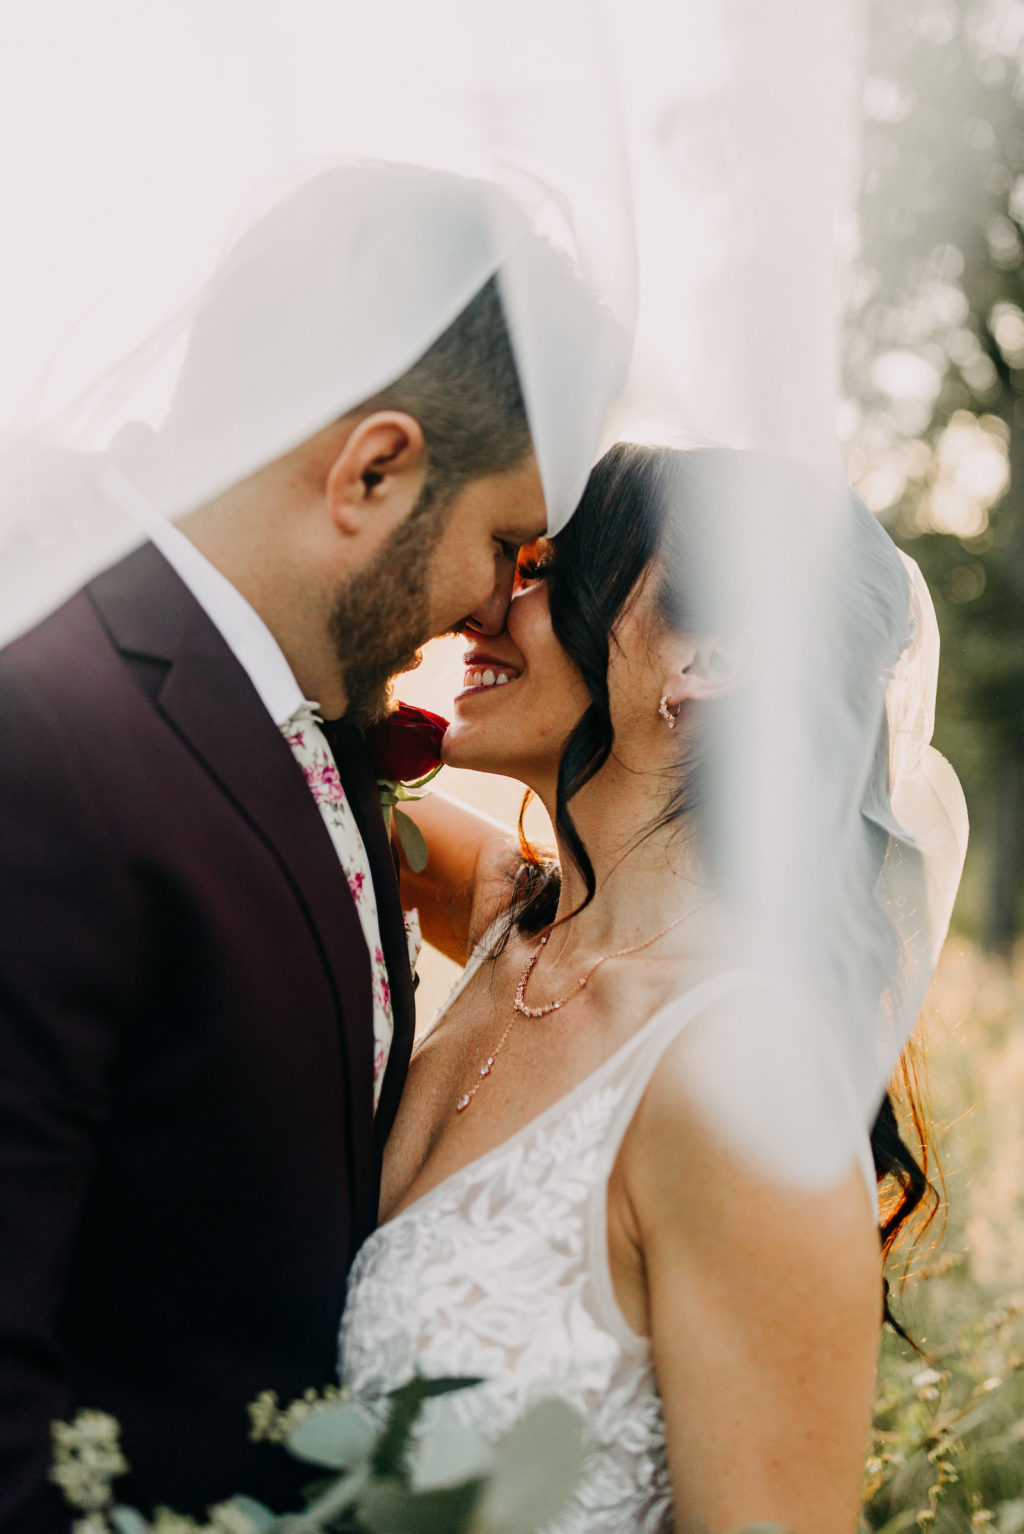 Romantic Unique Creative Bride and Groom Sunset Under Veil Kissing Portrait | Tampa Bay Wedding Photographer Amber McWhorter Photography